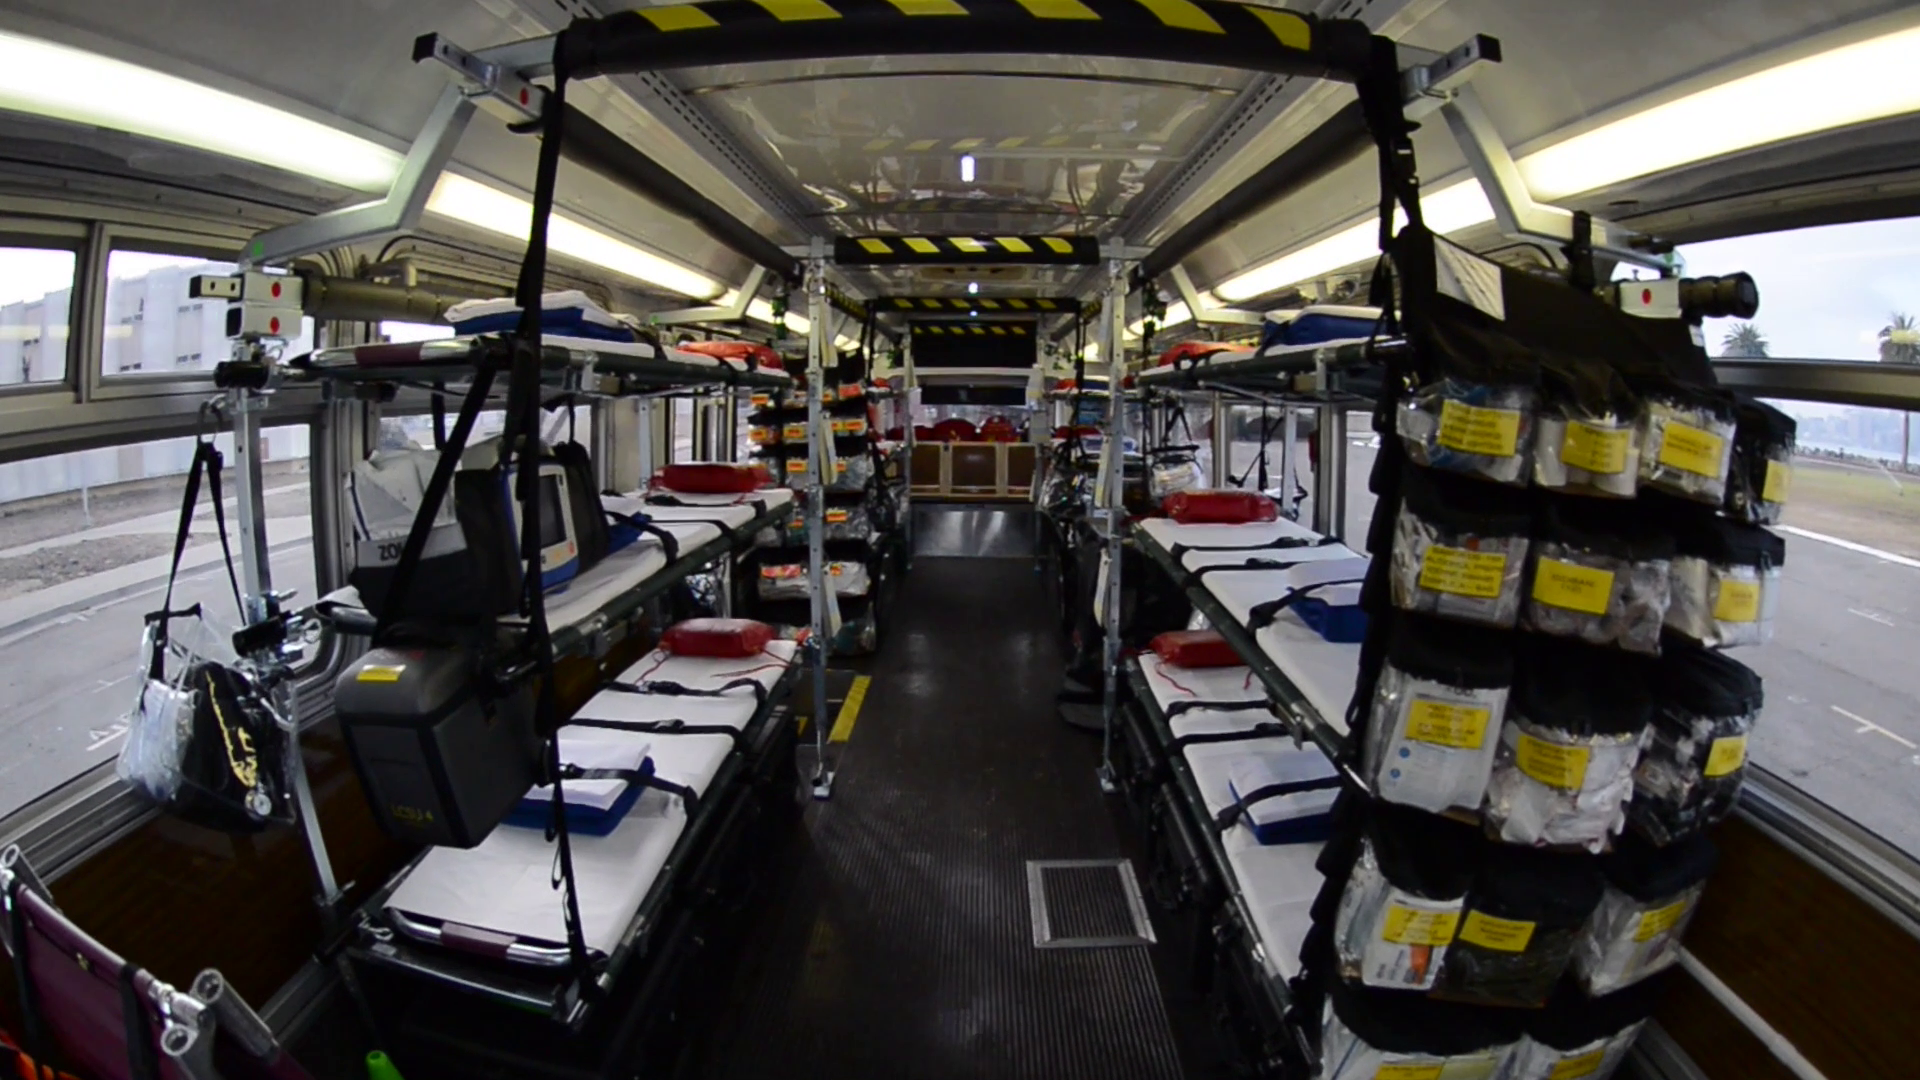 Fredericksburg company First Line Tech is assembling kits for the buses to allow nursing homes to be quickly evacuated -- an idea first used after Hurricane Katrina.